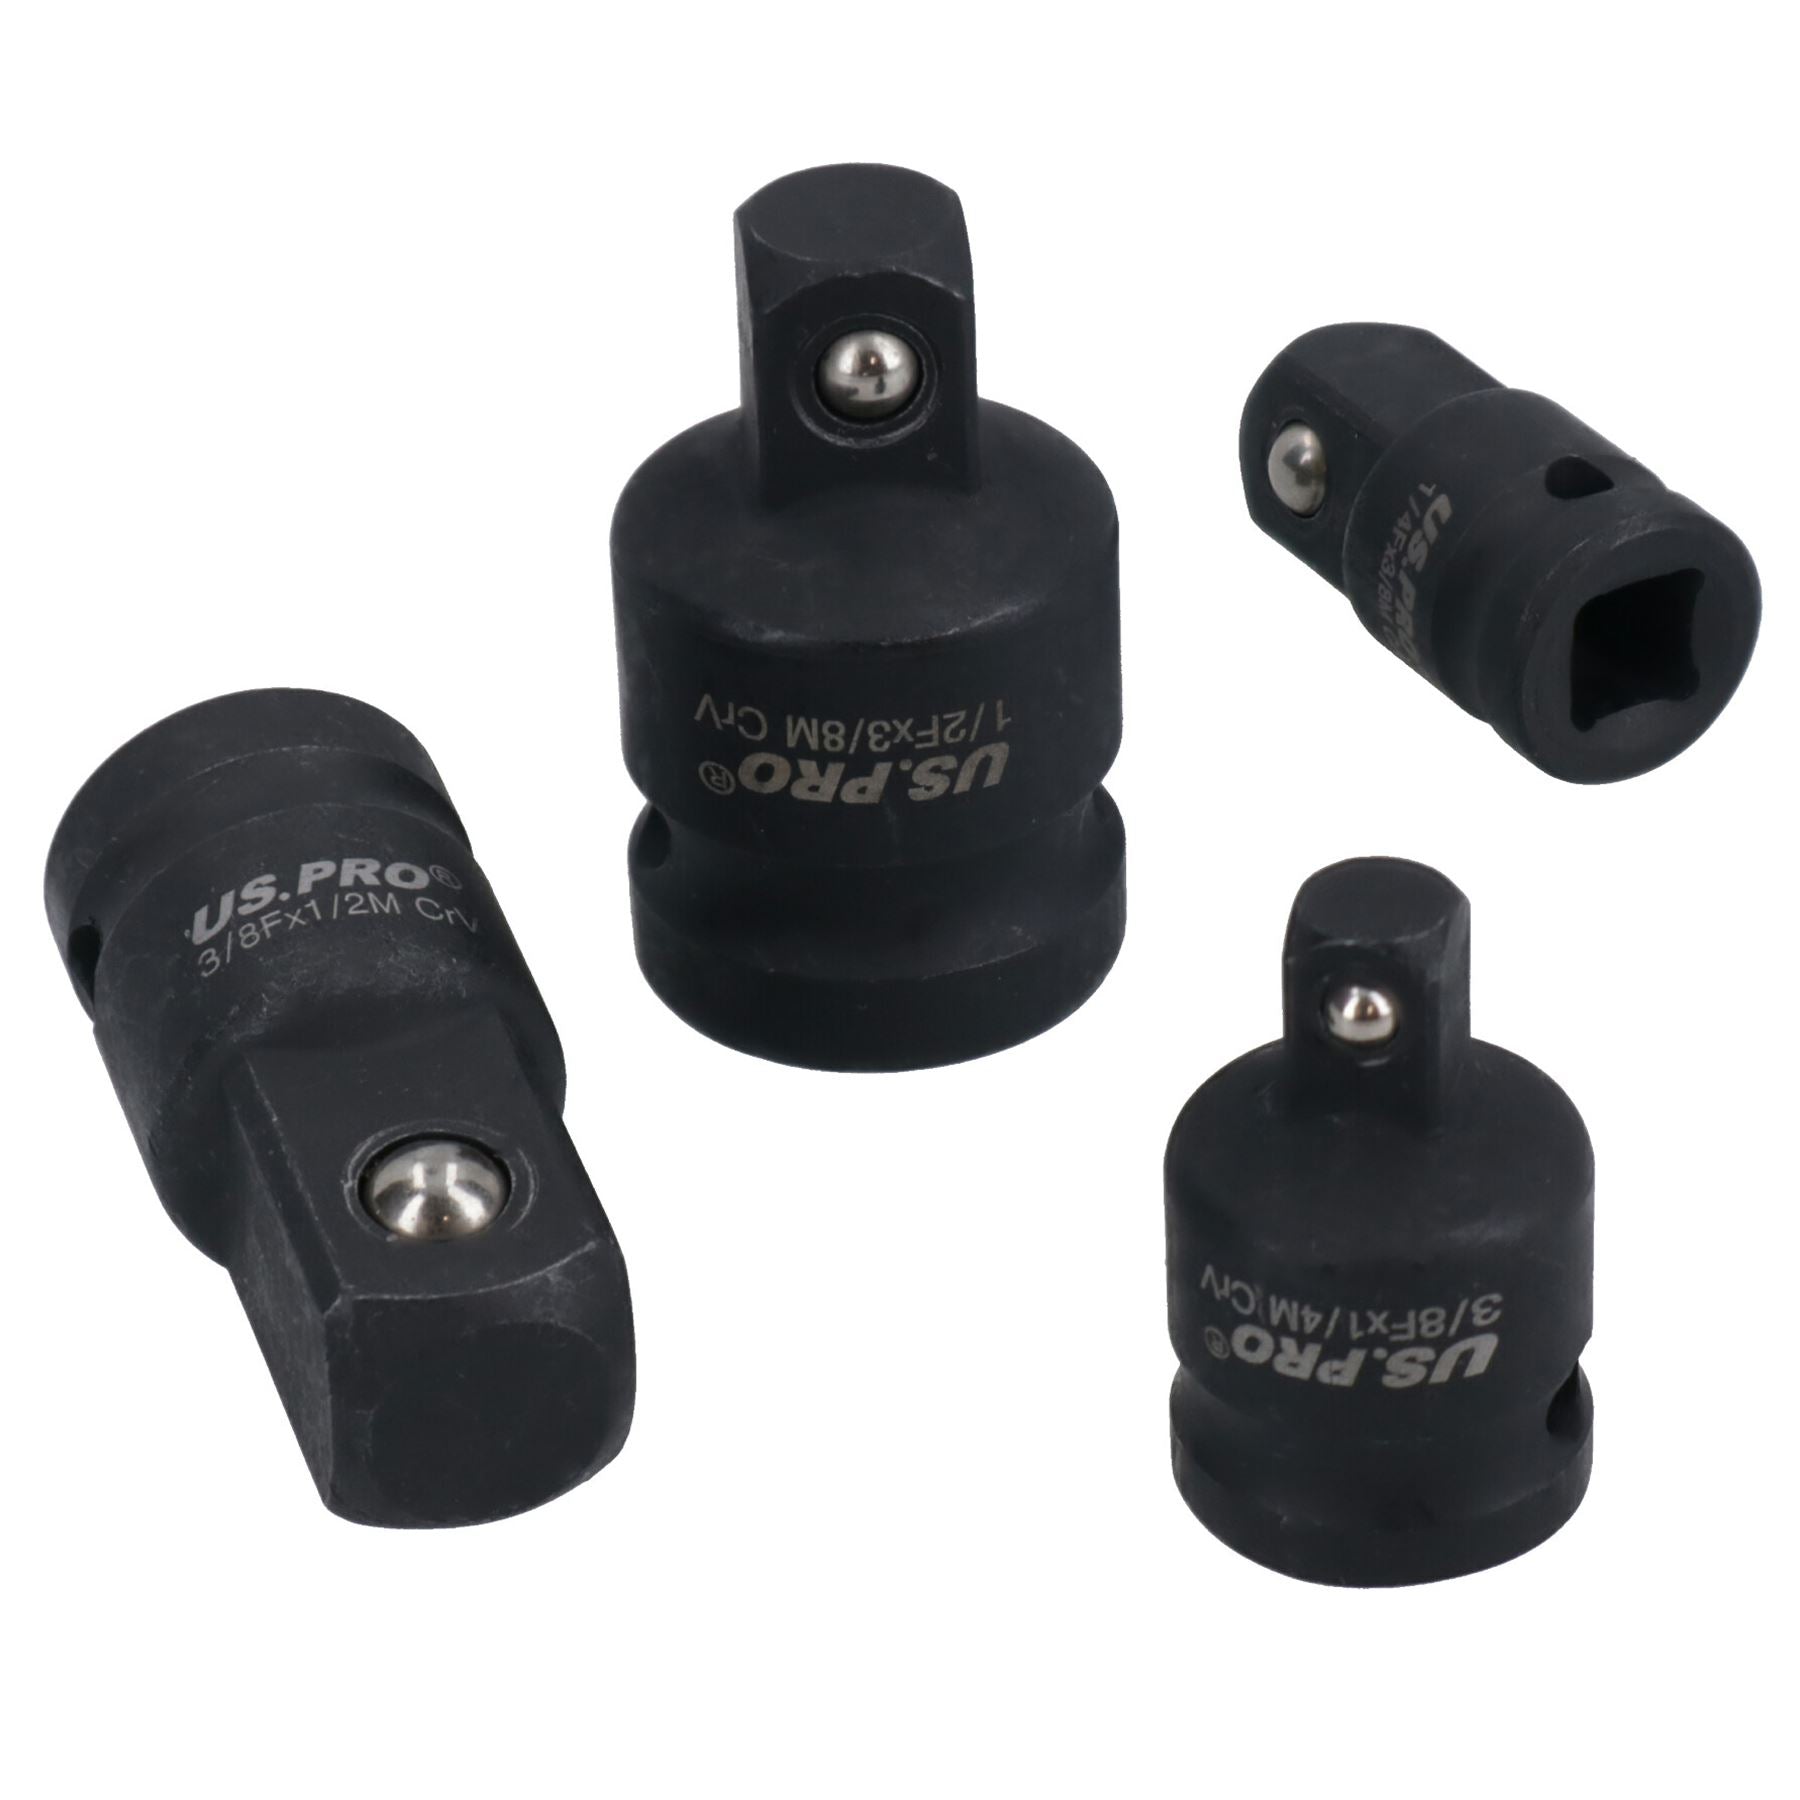 4pc Impact Socket Adaptor Adapter Step Up Step Down Reducer Converter